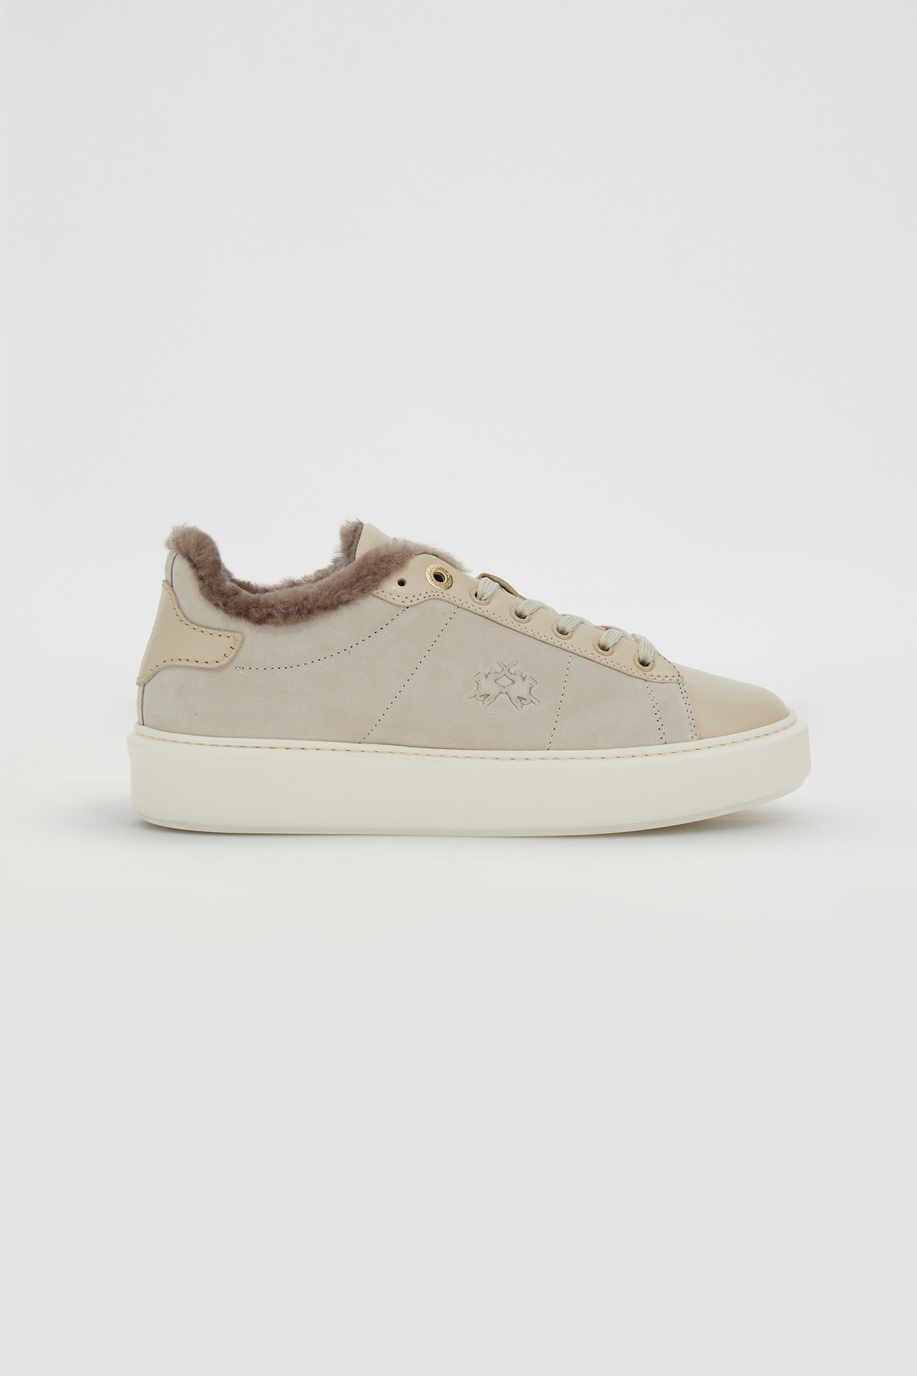 Women's trainers with inner lining - Sneakers | La Martina - Official Online Shop